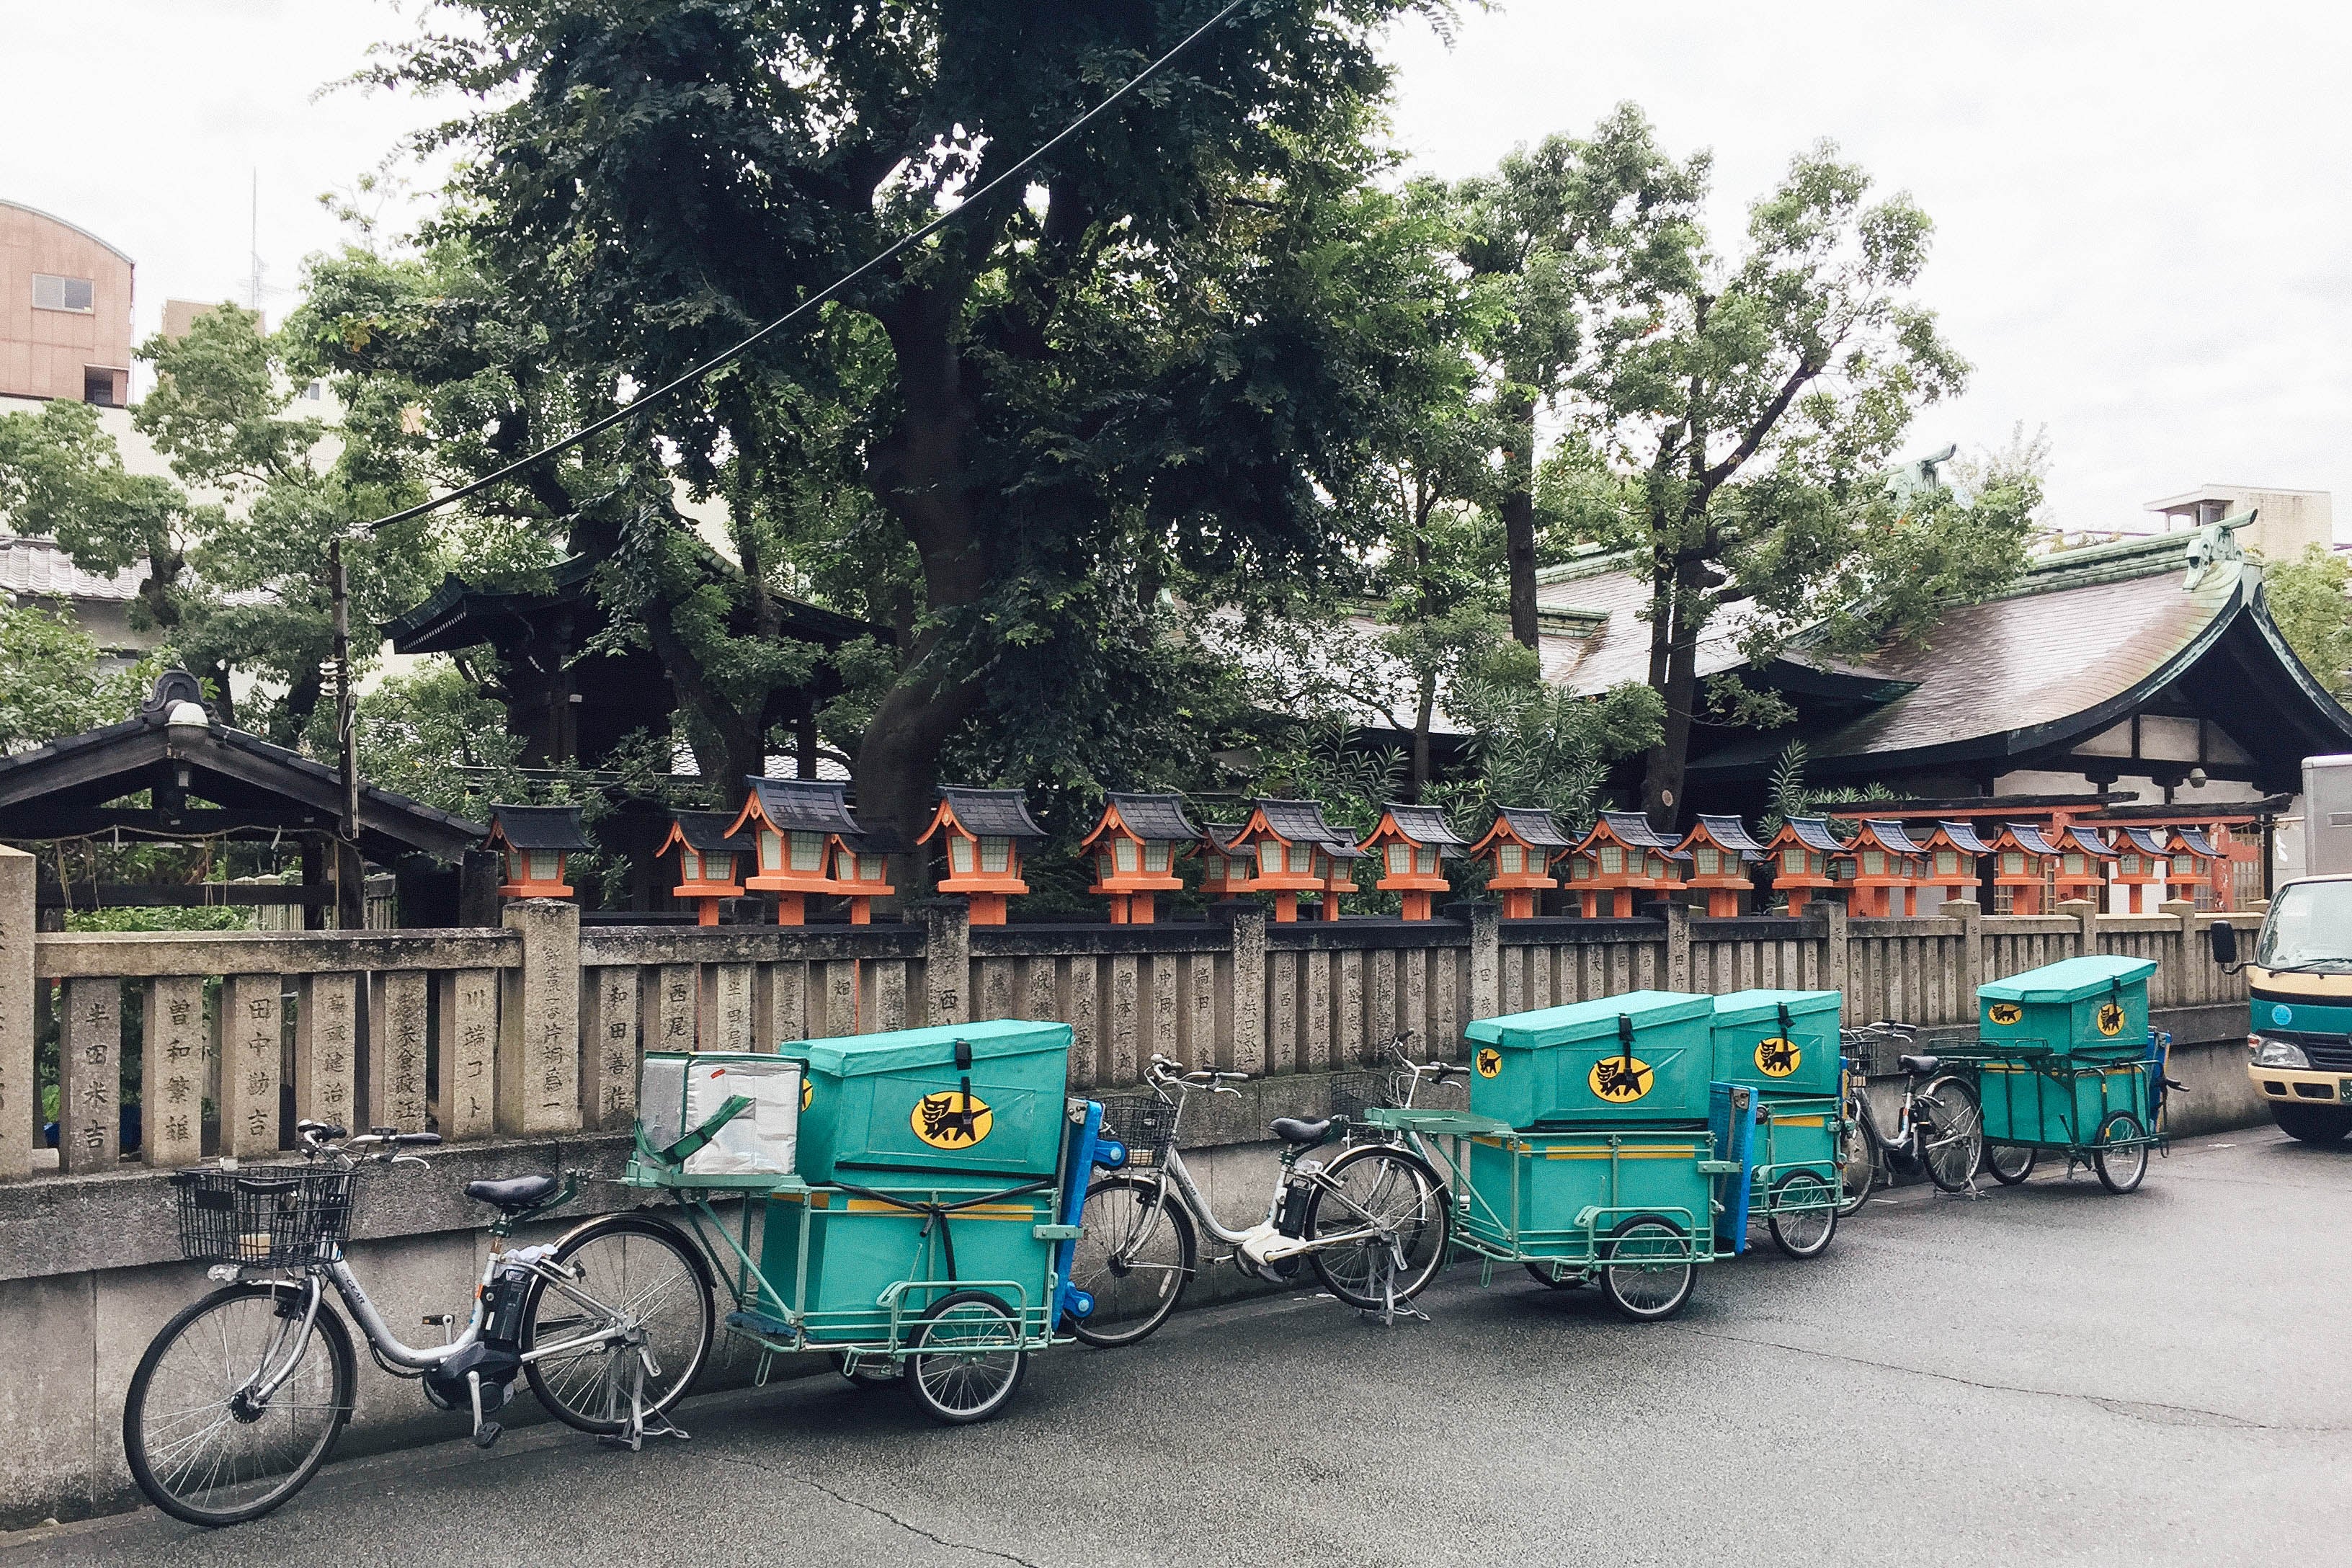 A row of bikes on a city street in Japan